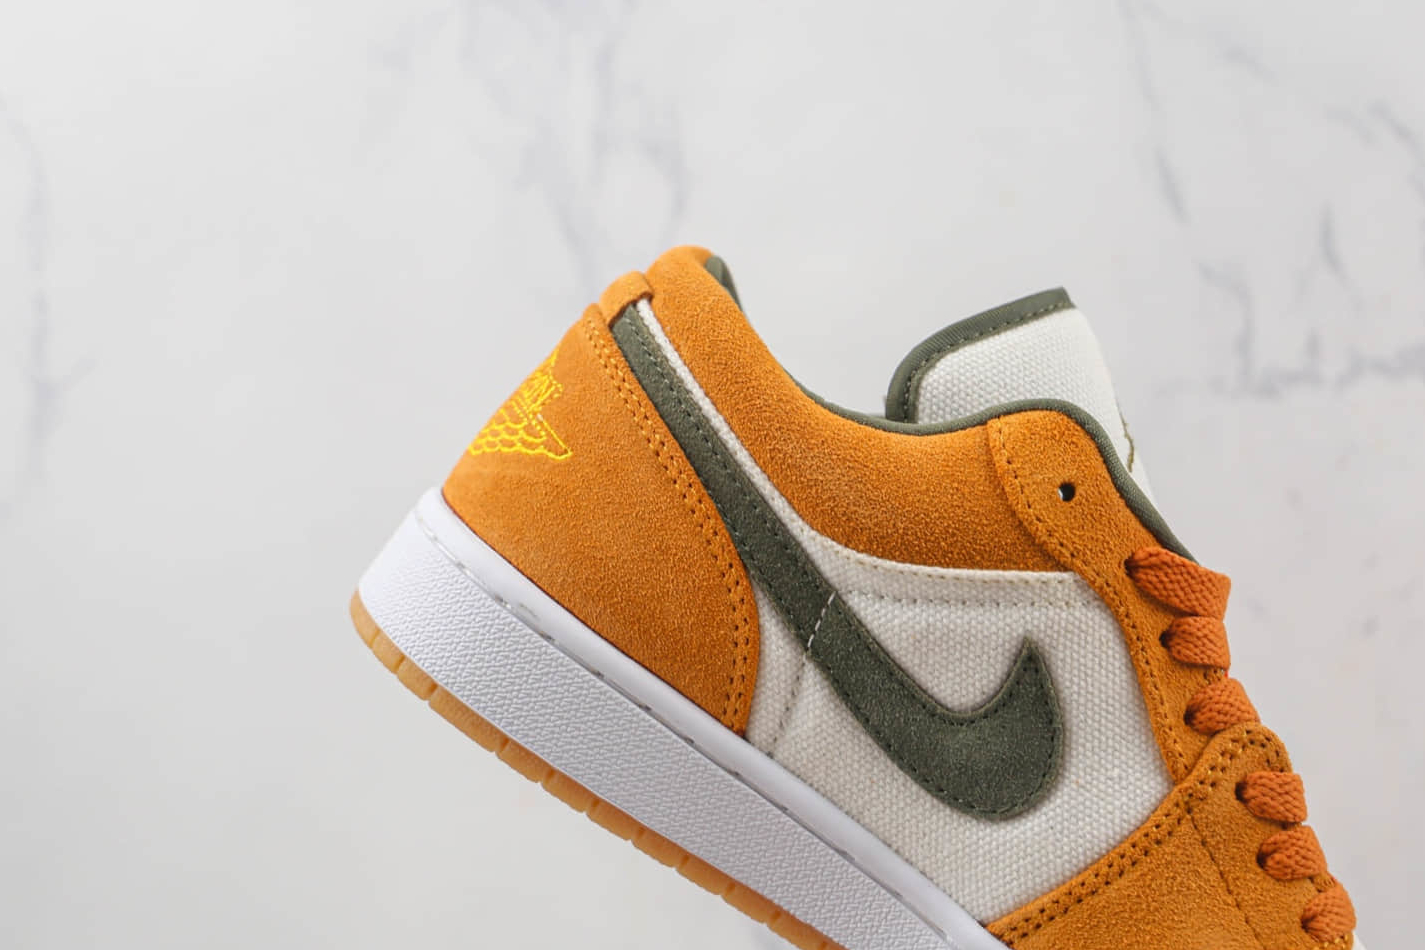 Air Jordan 1 Low SE 'Light Curry' DH6931-102: Premium Sneaker with a Distinctive Style